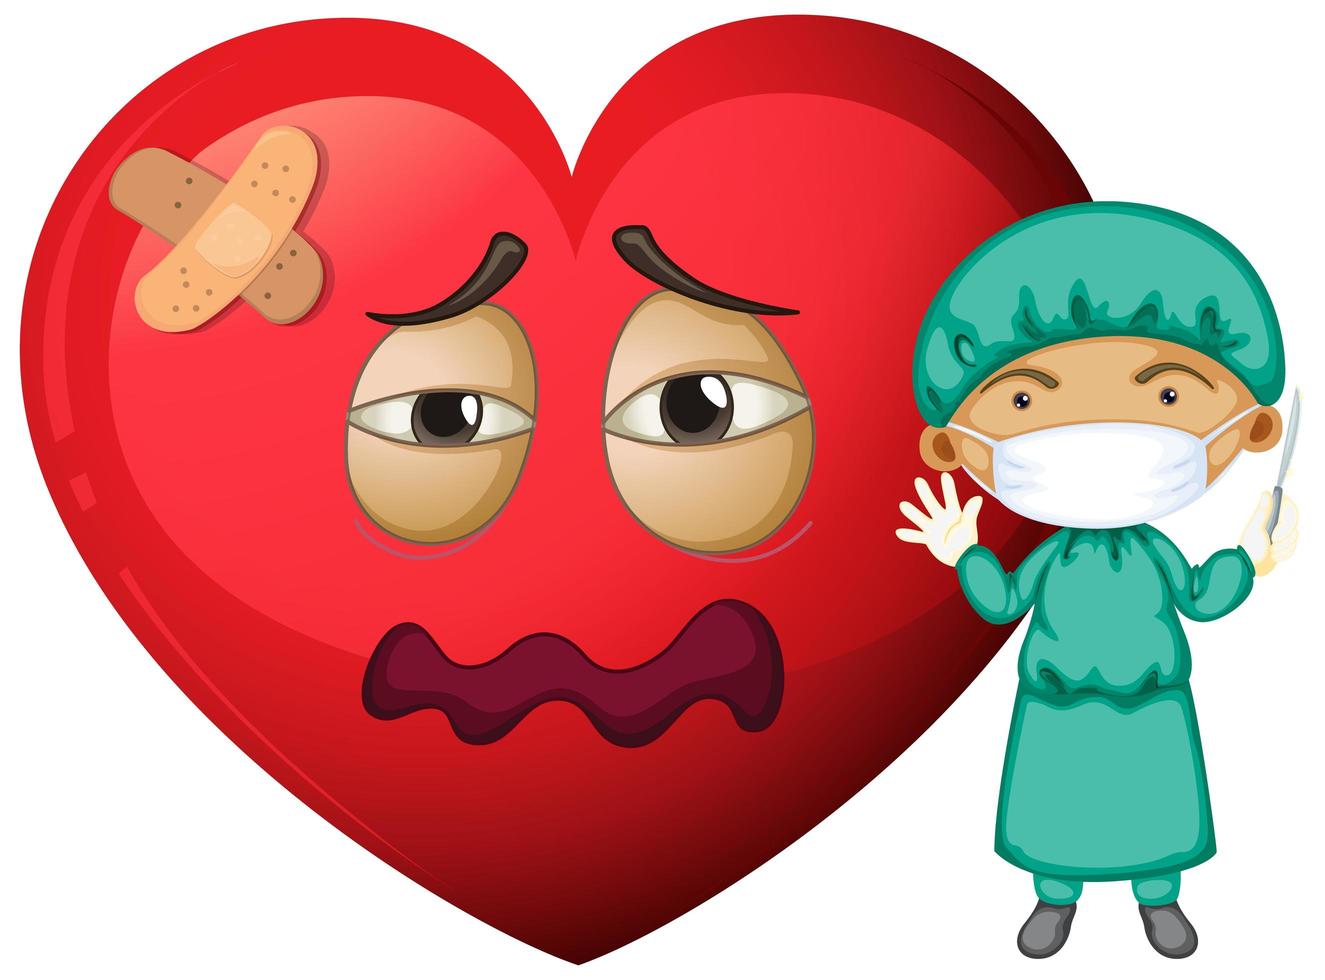 Sad heart emoticon with a doctor wearing mask cartoon character vector